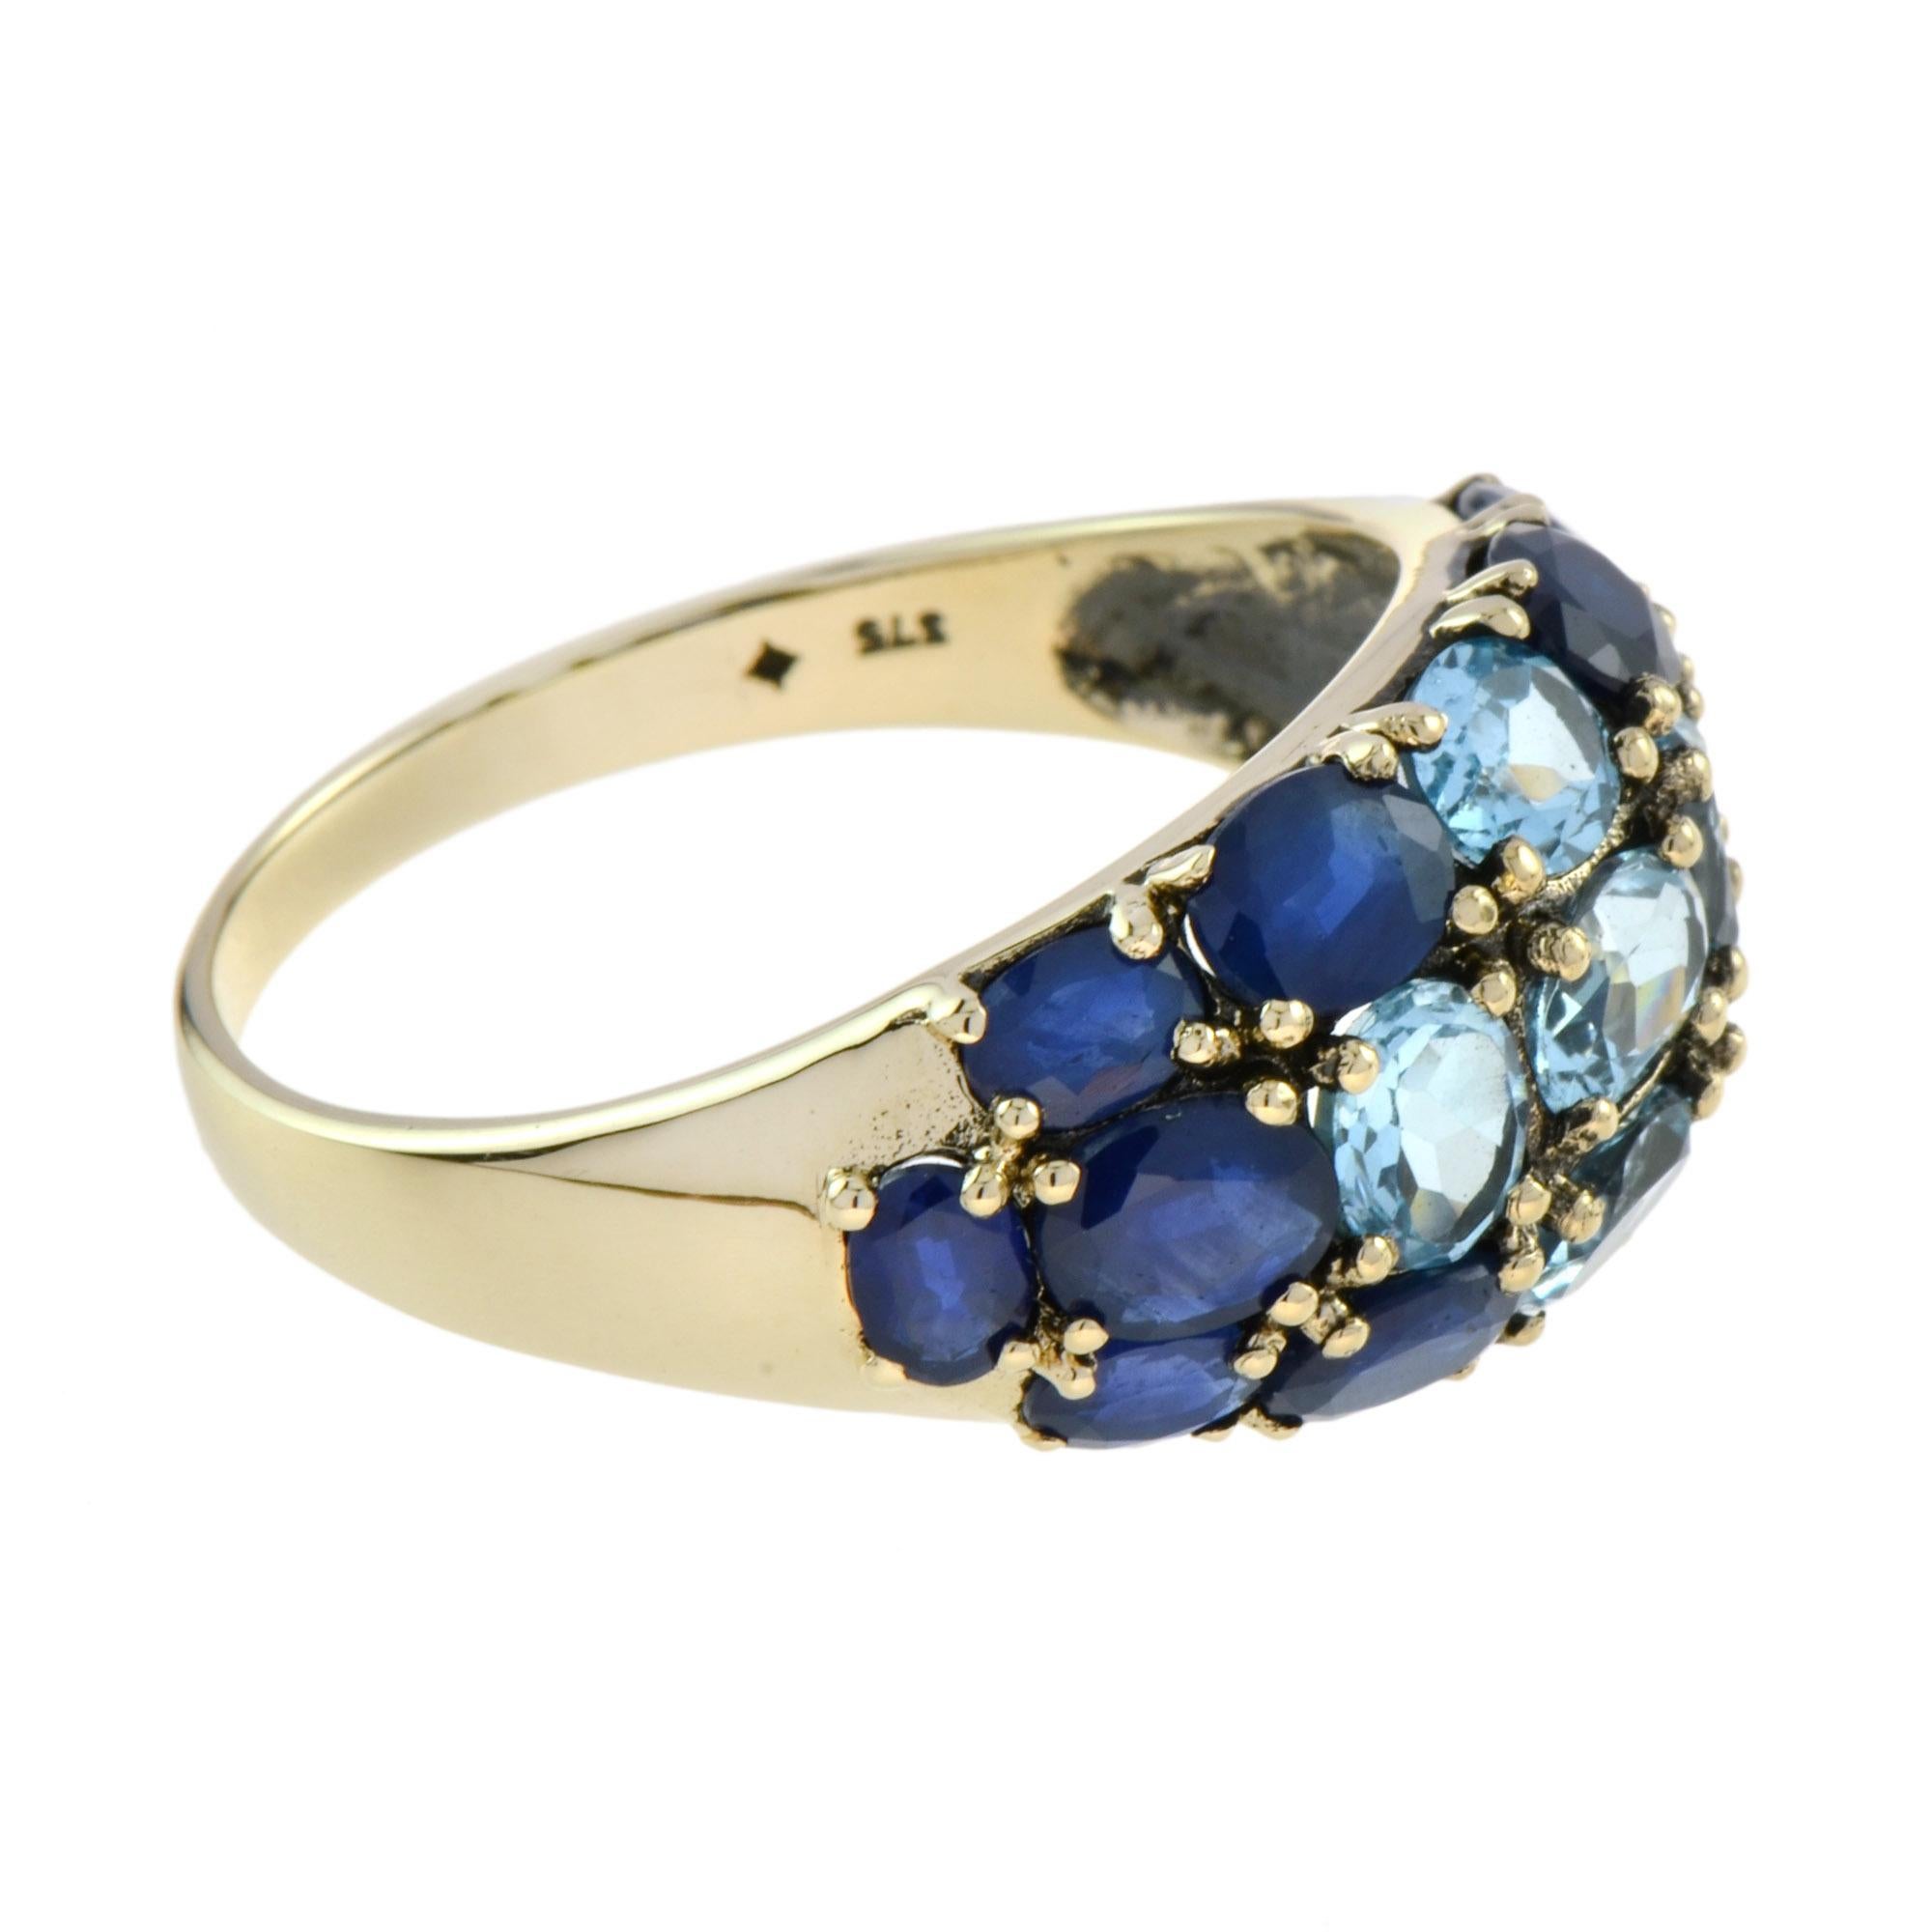 For Sale:  Vintage Style Blue Topaz and Sapphire Cocktail Ring in 14K Yellow Gold 4